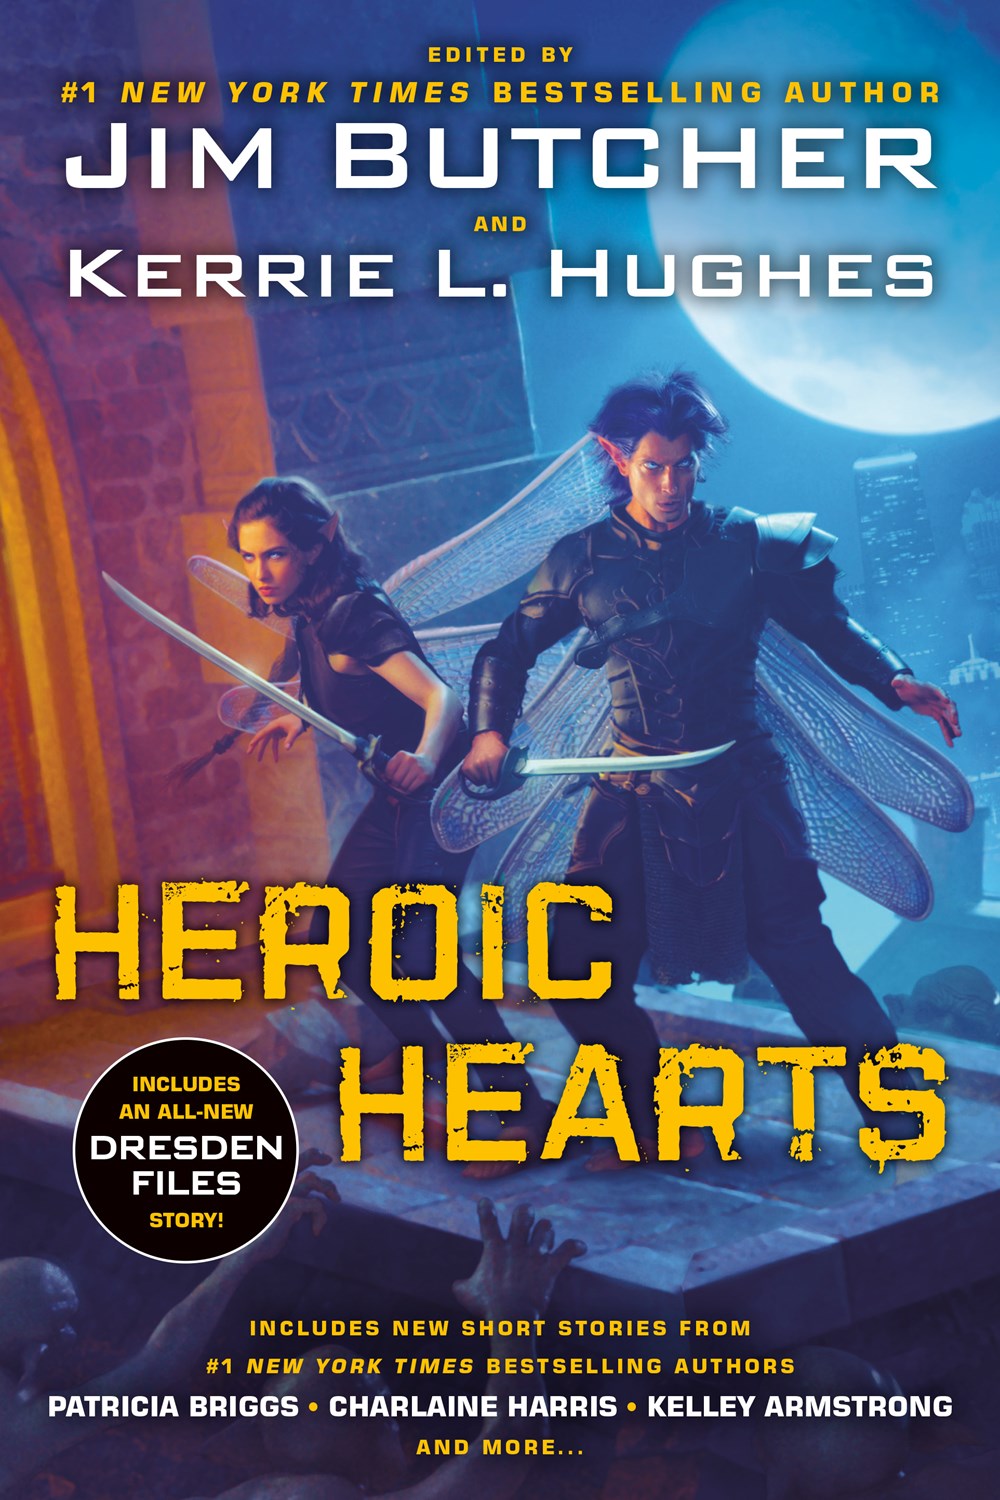 Heroic Hearts (Alpha & Omega #6.5 Dating Terrors) Free Download